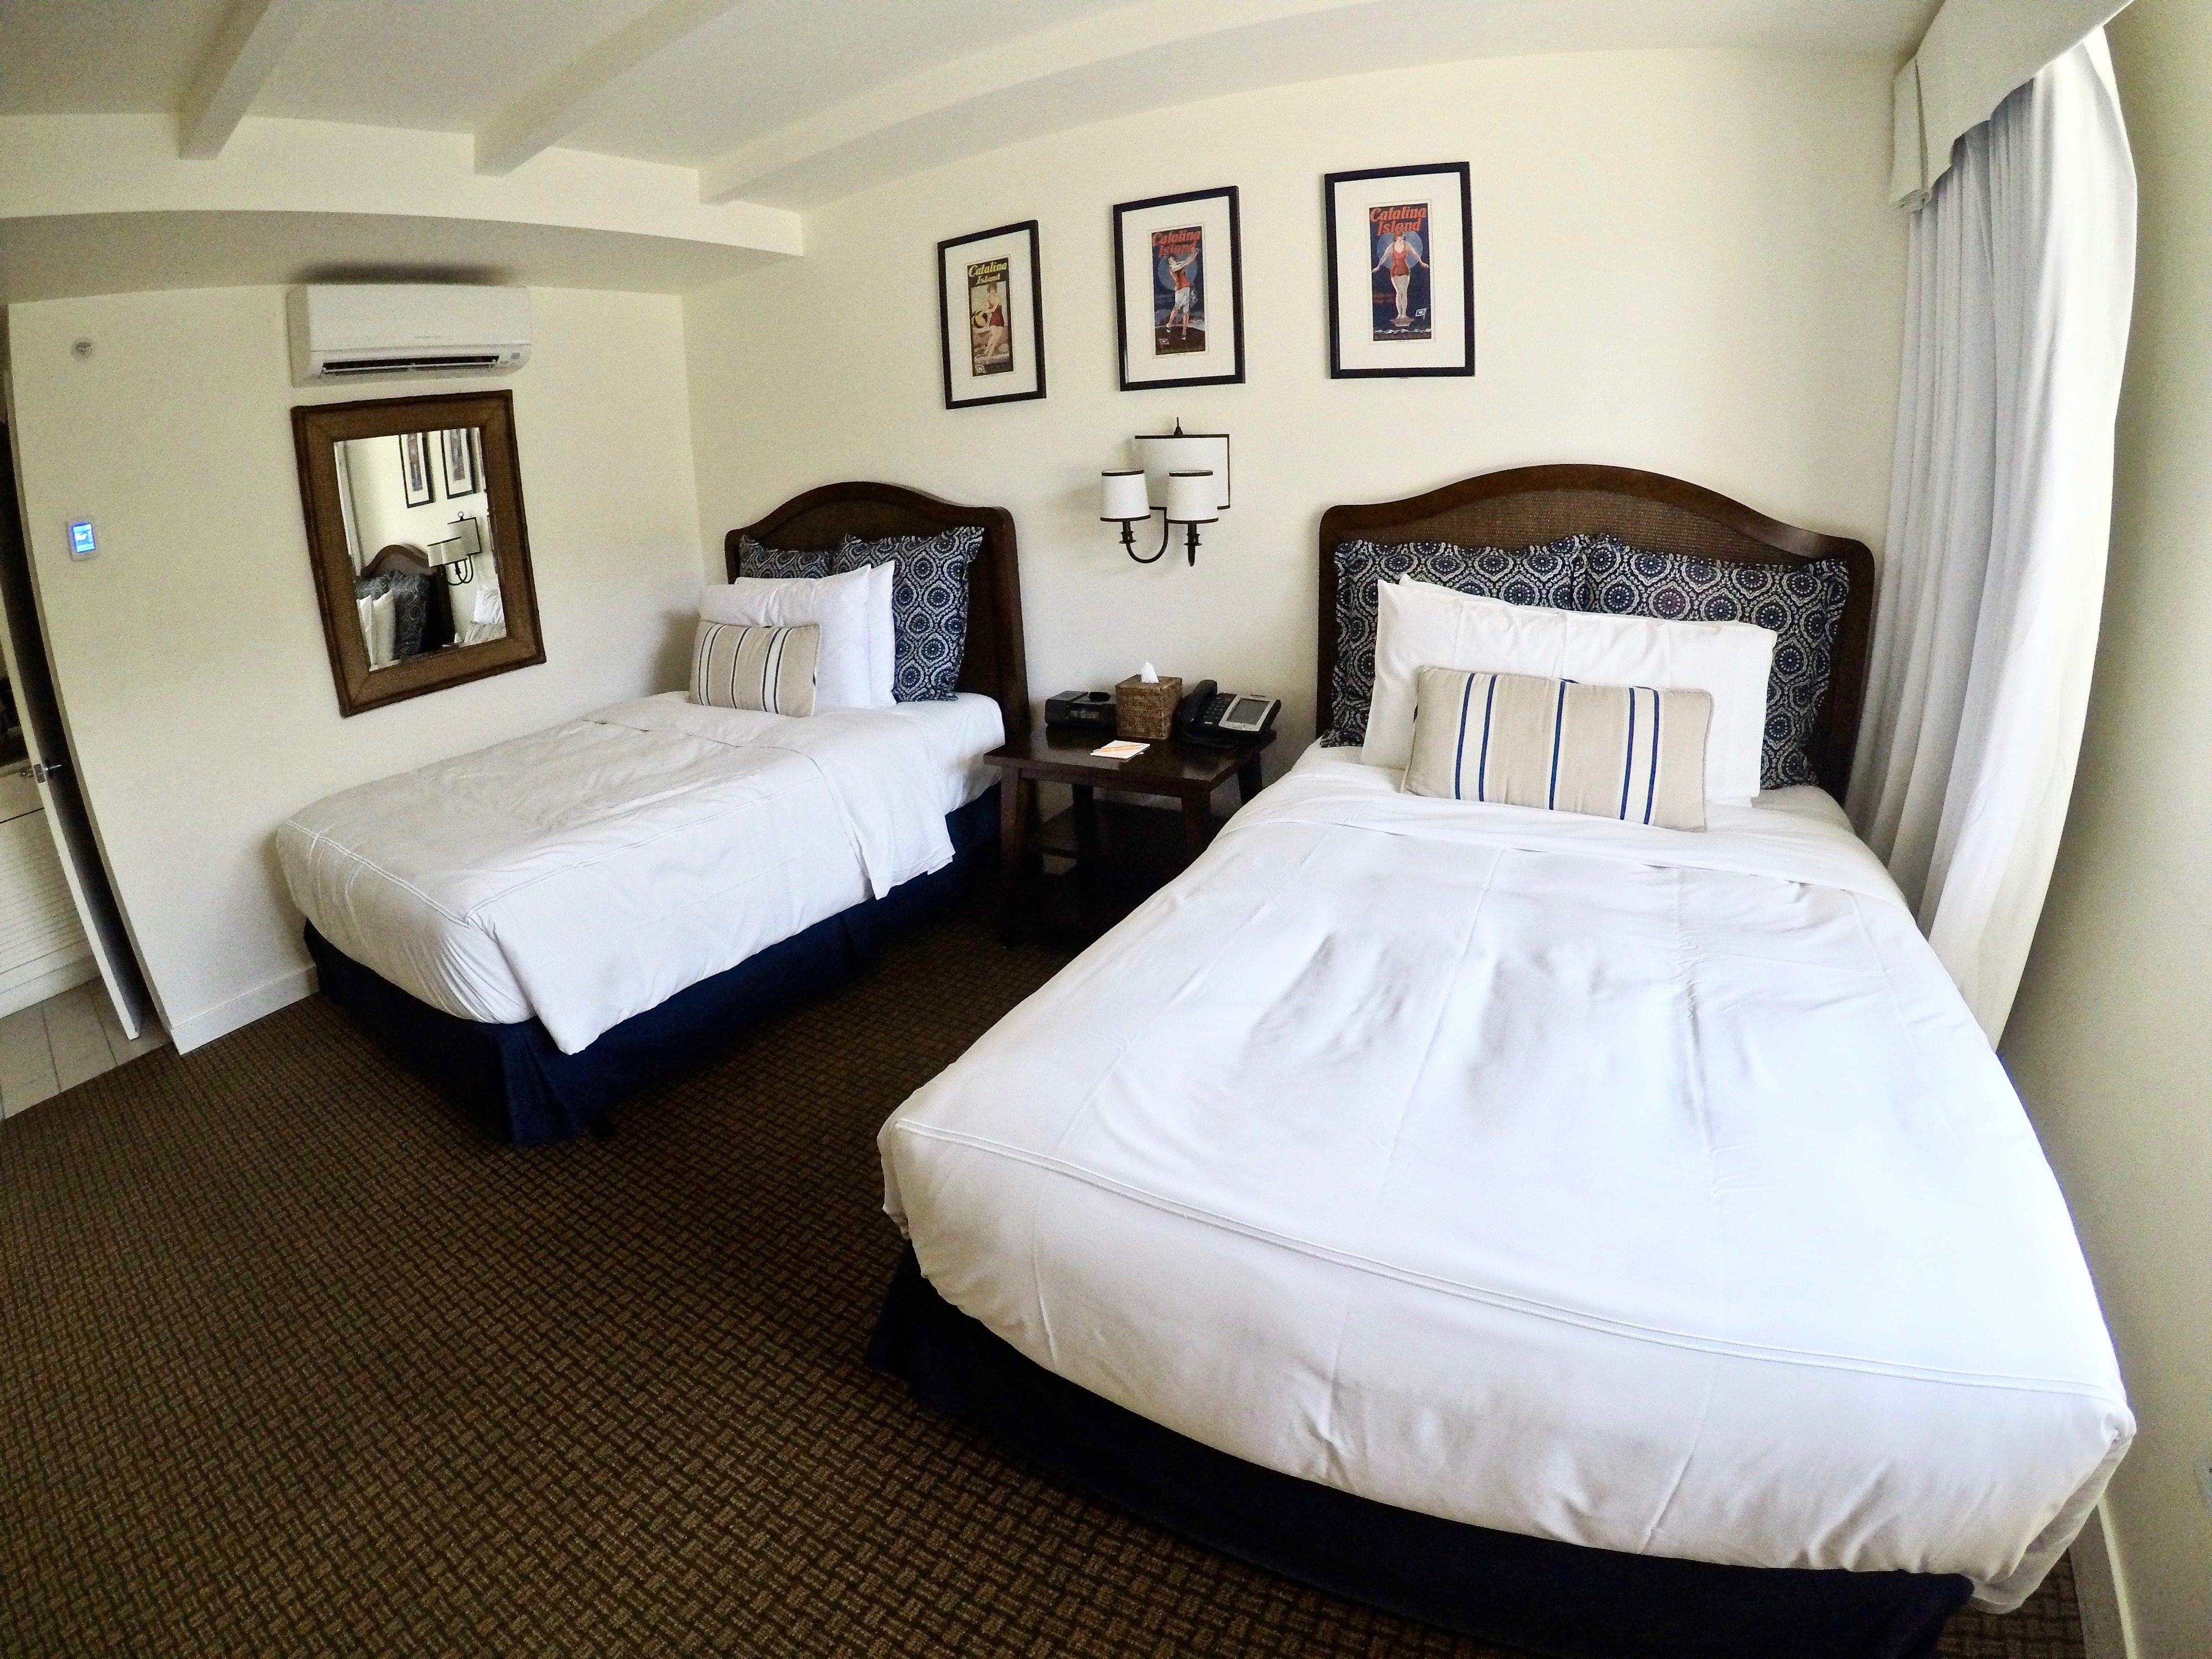 Things to do in Catalina Island Pavilion Hotel